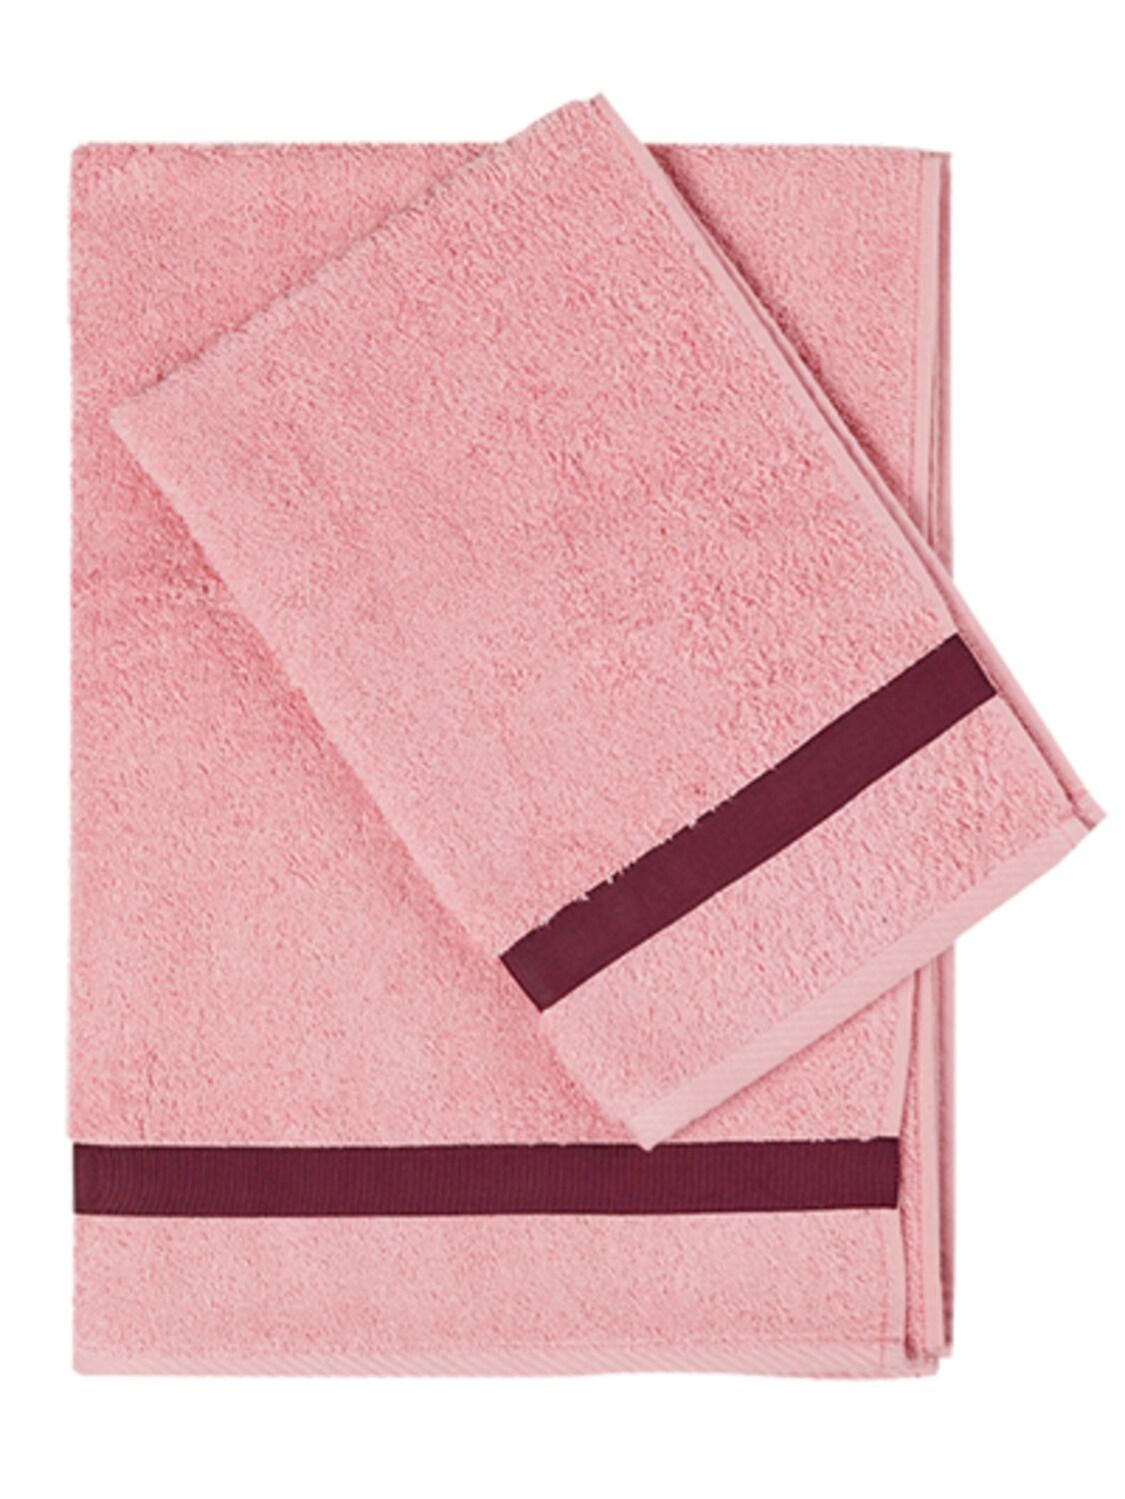 Alessandro Di Marco Set Of 2 Cotton Terrycloth Towels In Pink